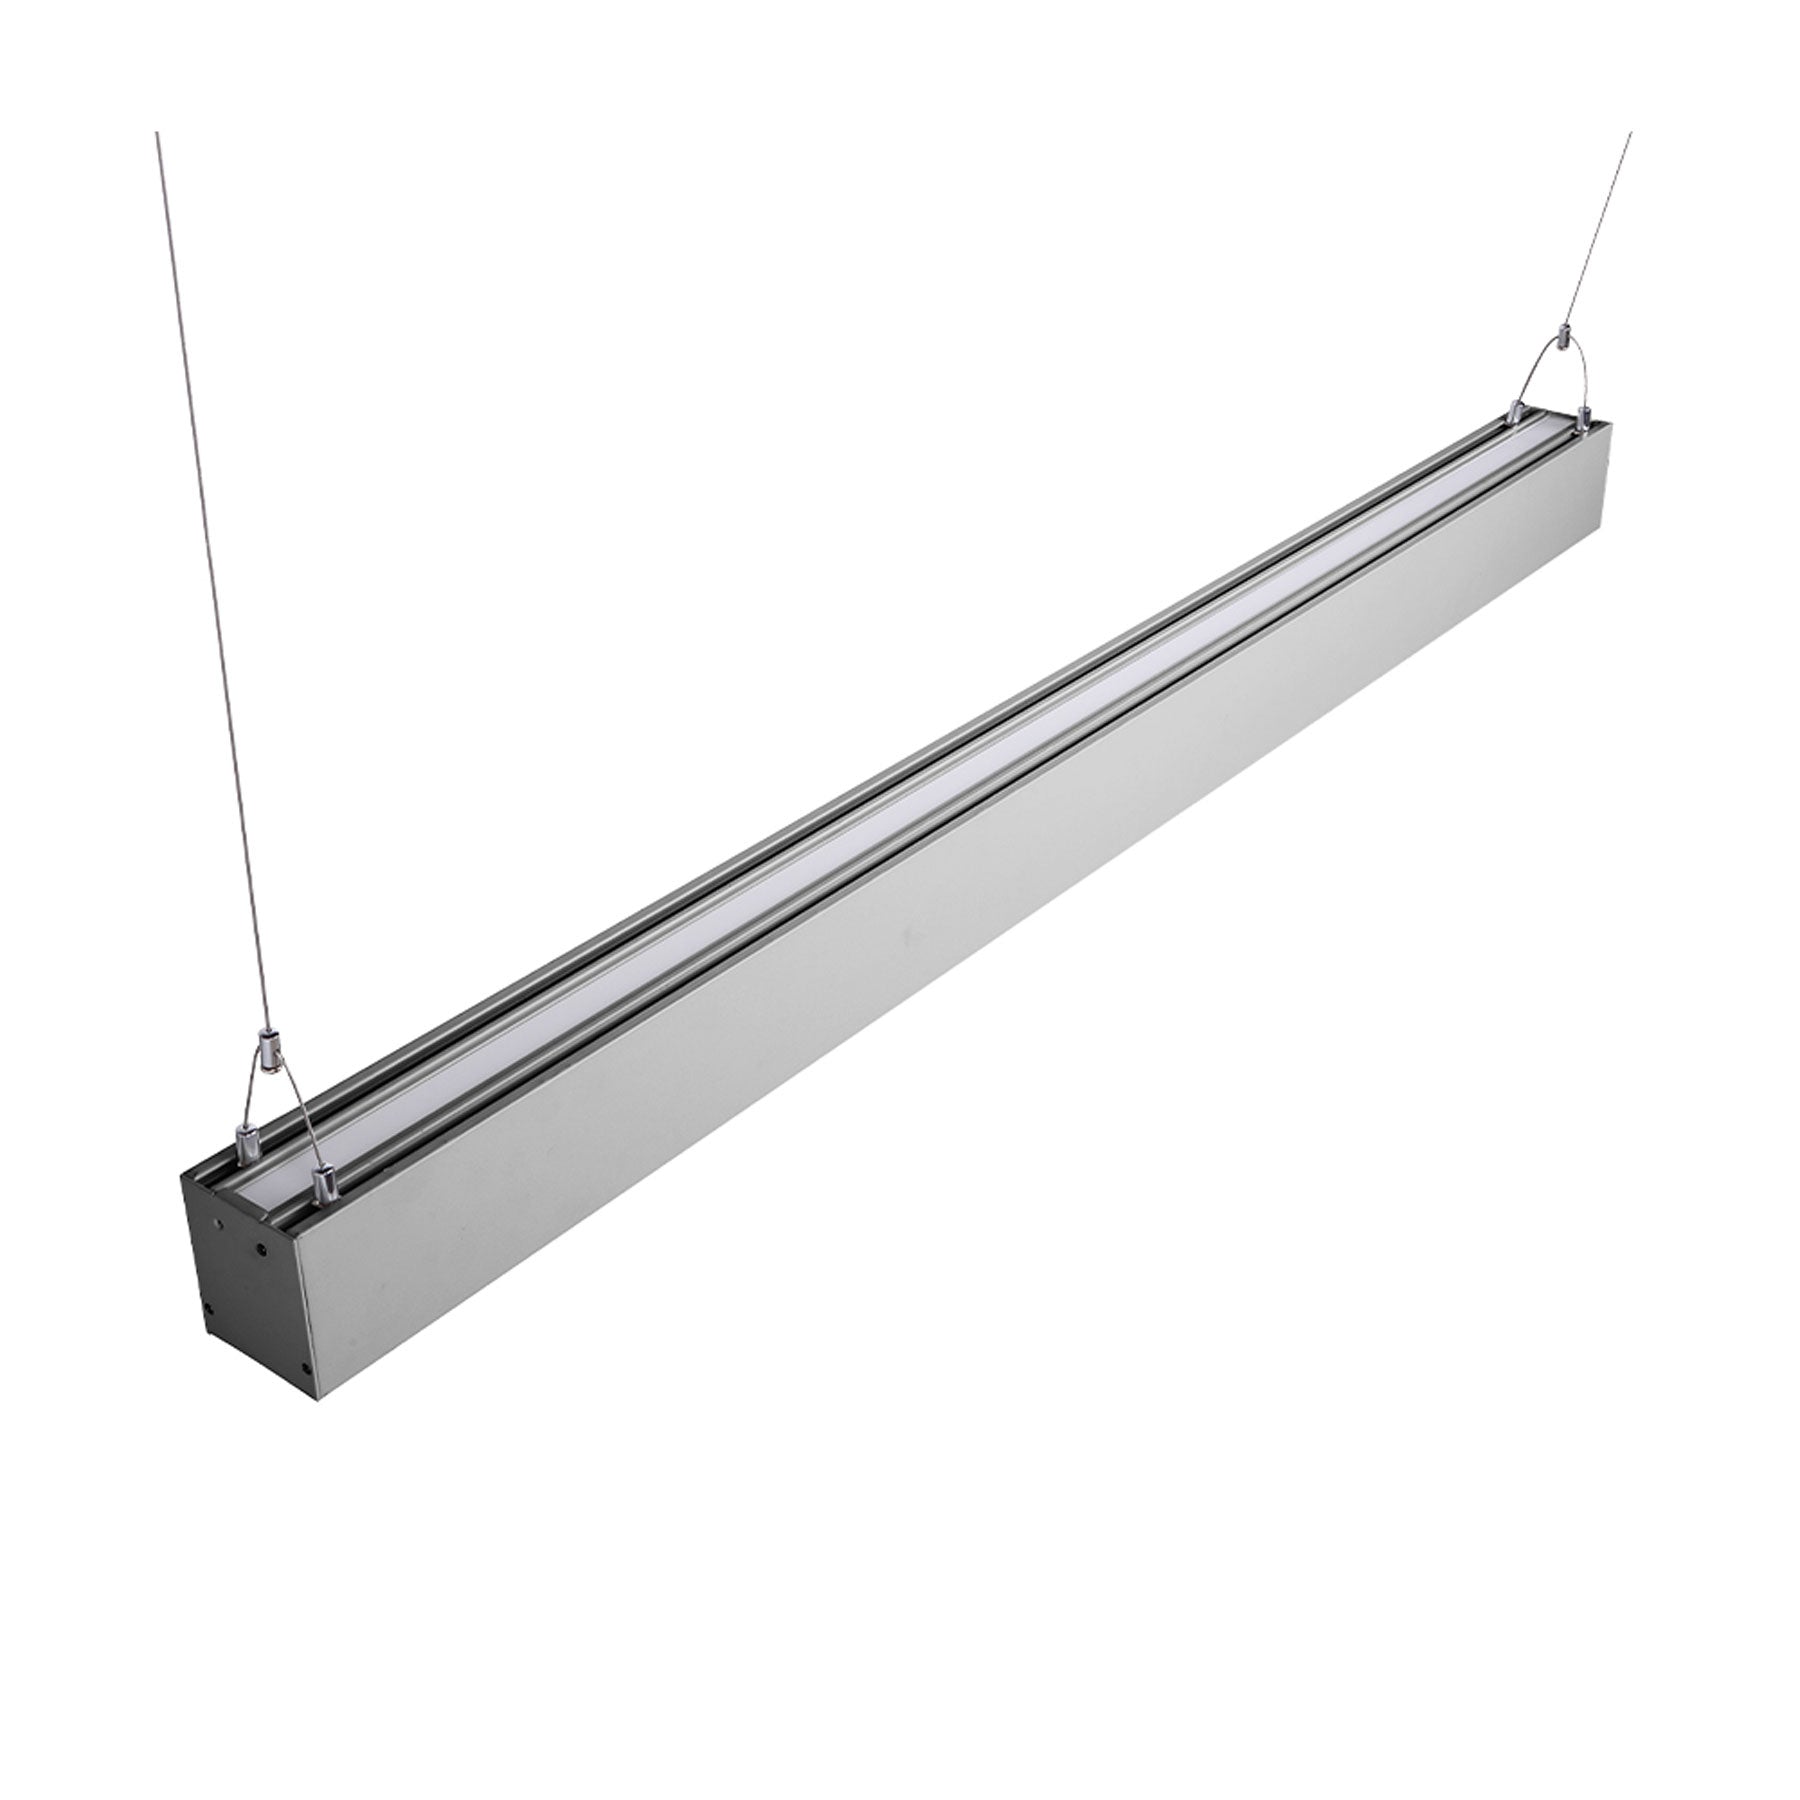 Suspended Up & Down Dual CCT Selectable LED Linear Light Fixture, Silver